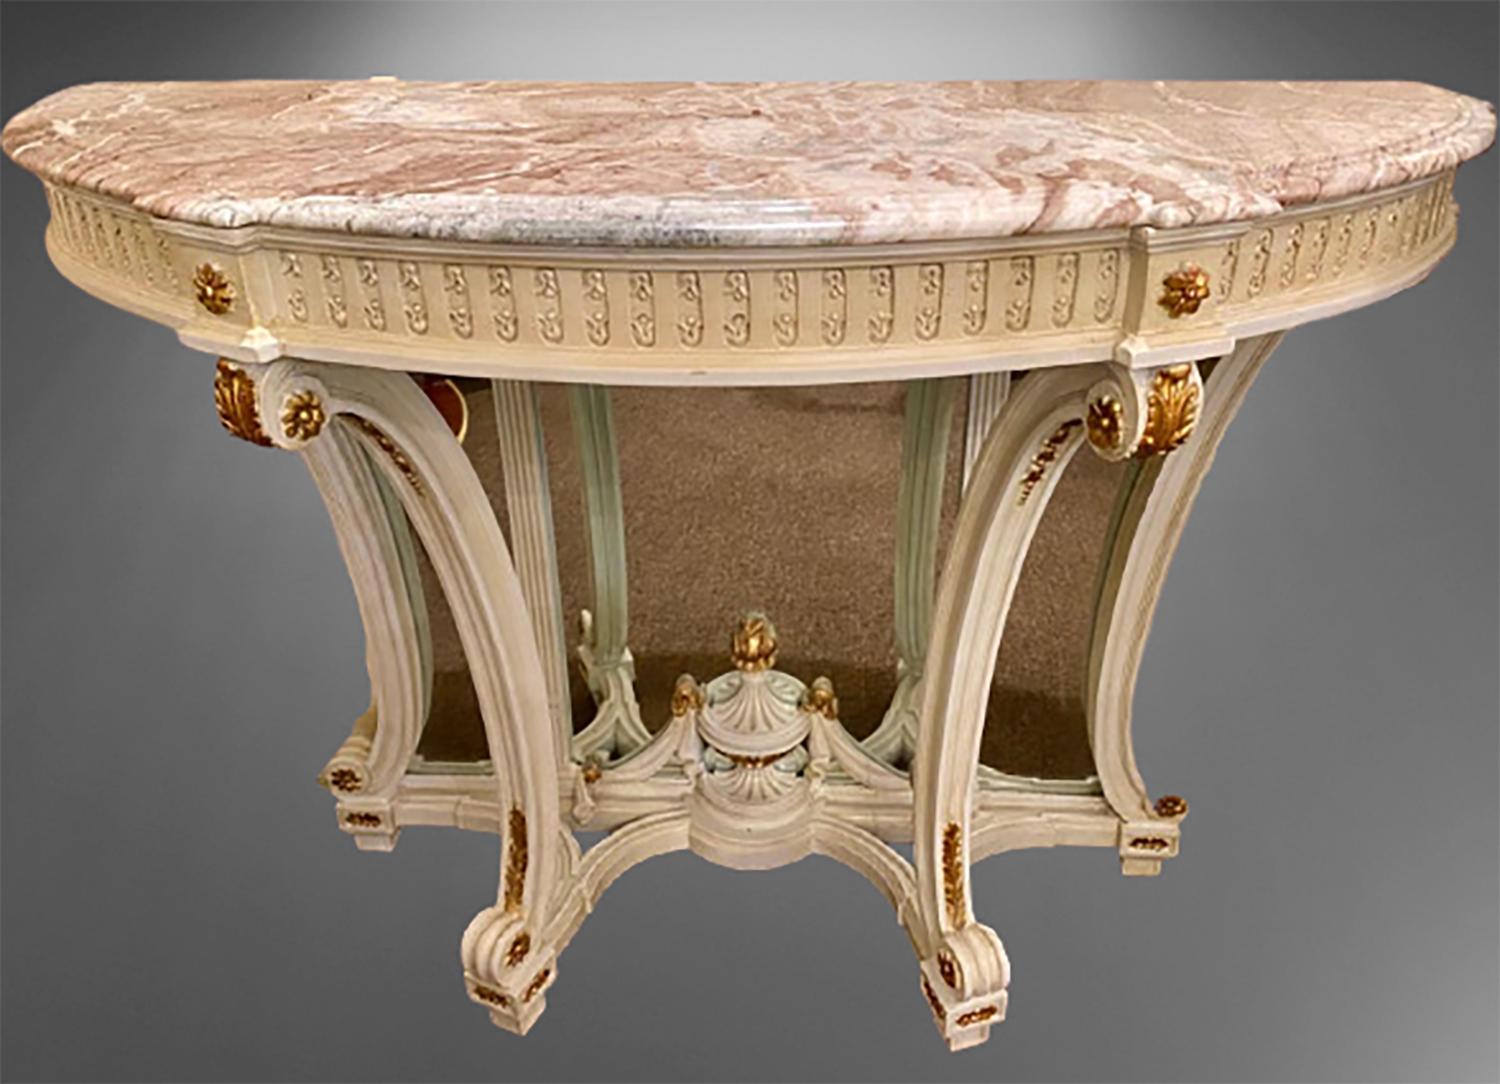 Demilune Hollywood Regency style marble-top consoles or serving tables. A pair of fine Louis XVI style custom quality parcel gilt and crème paint decorated beveled mirror back consoles, serving or sofa tables. With sprayed legs and a carved